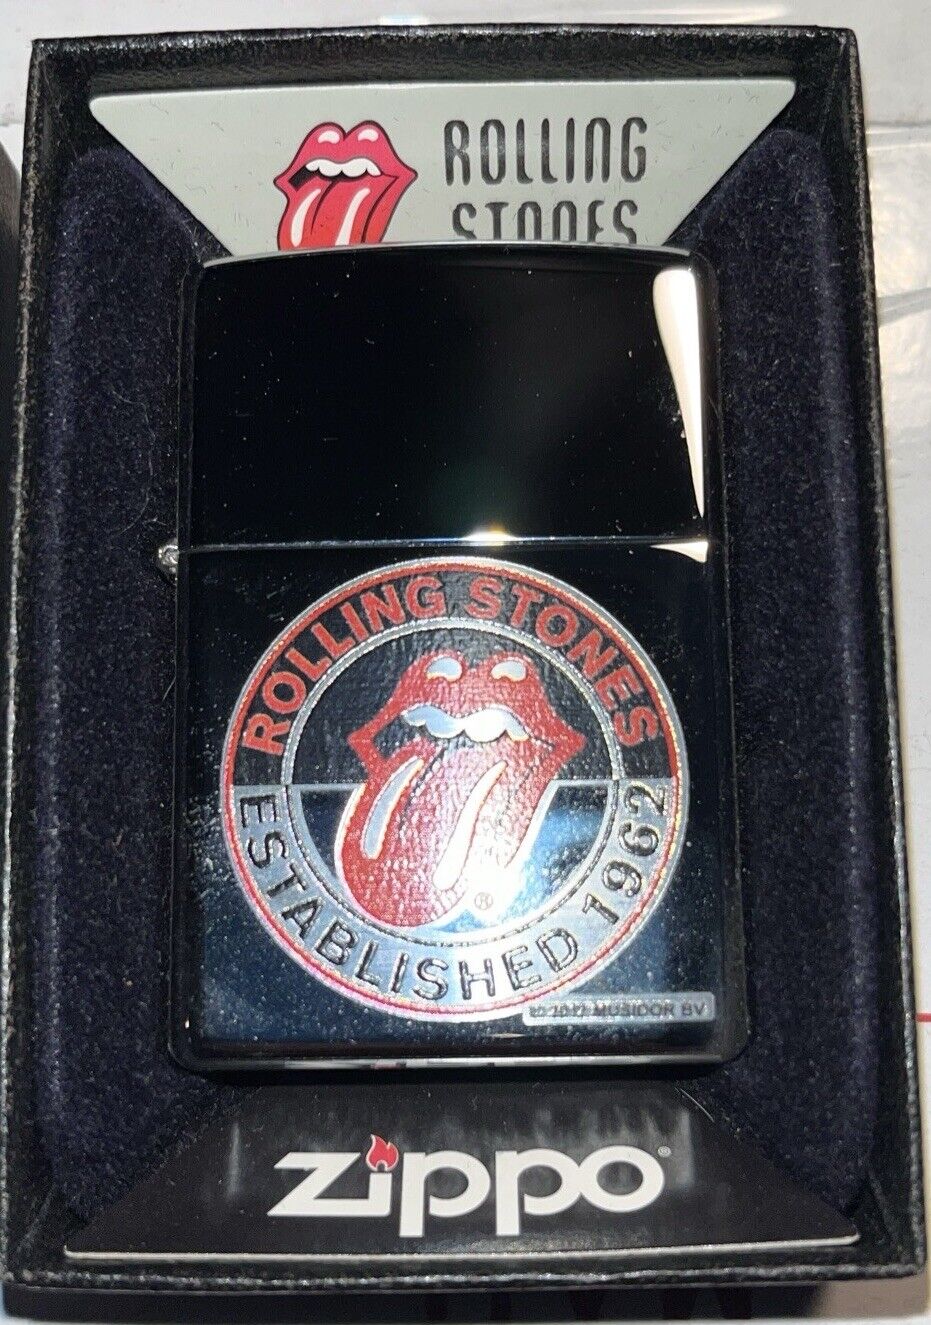 New The Rolling Stones Established 1962 Zippo - original box with Stickers